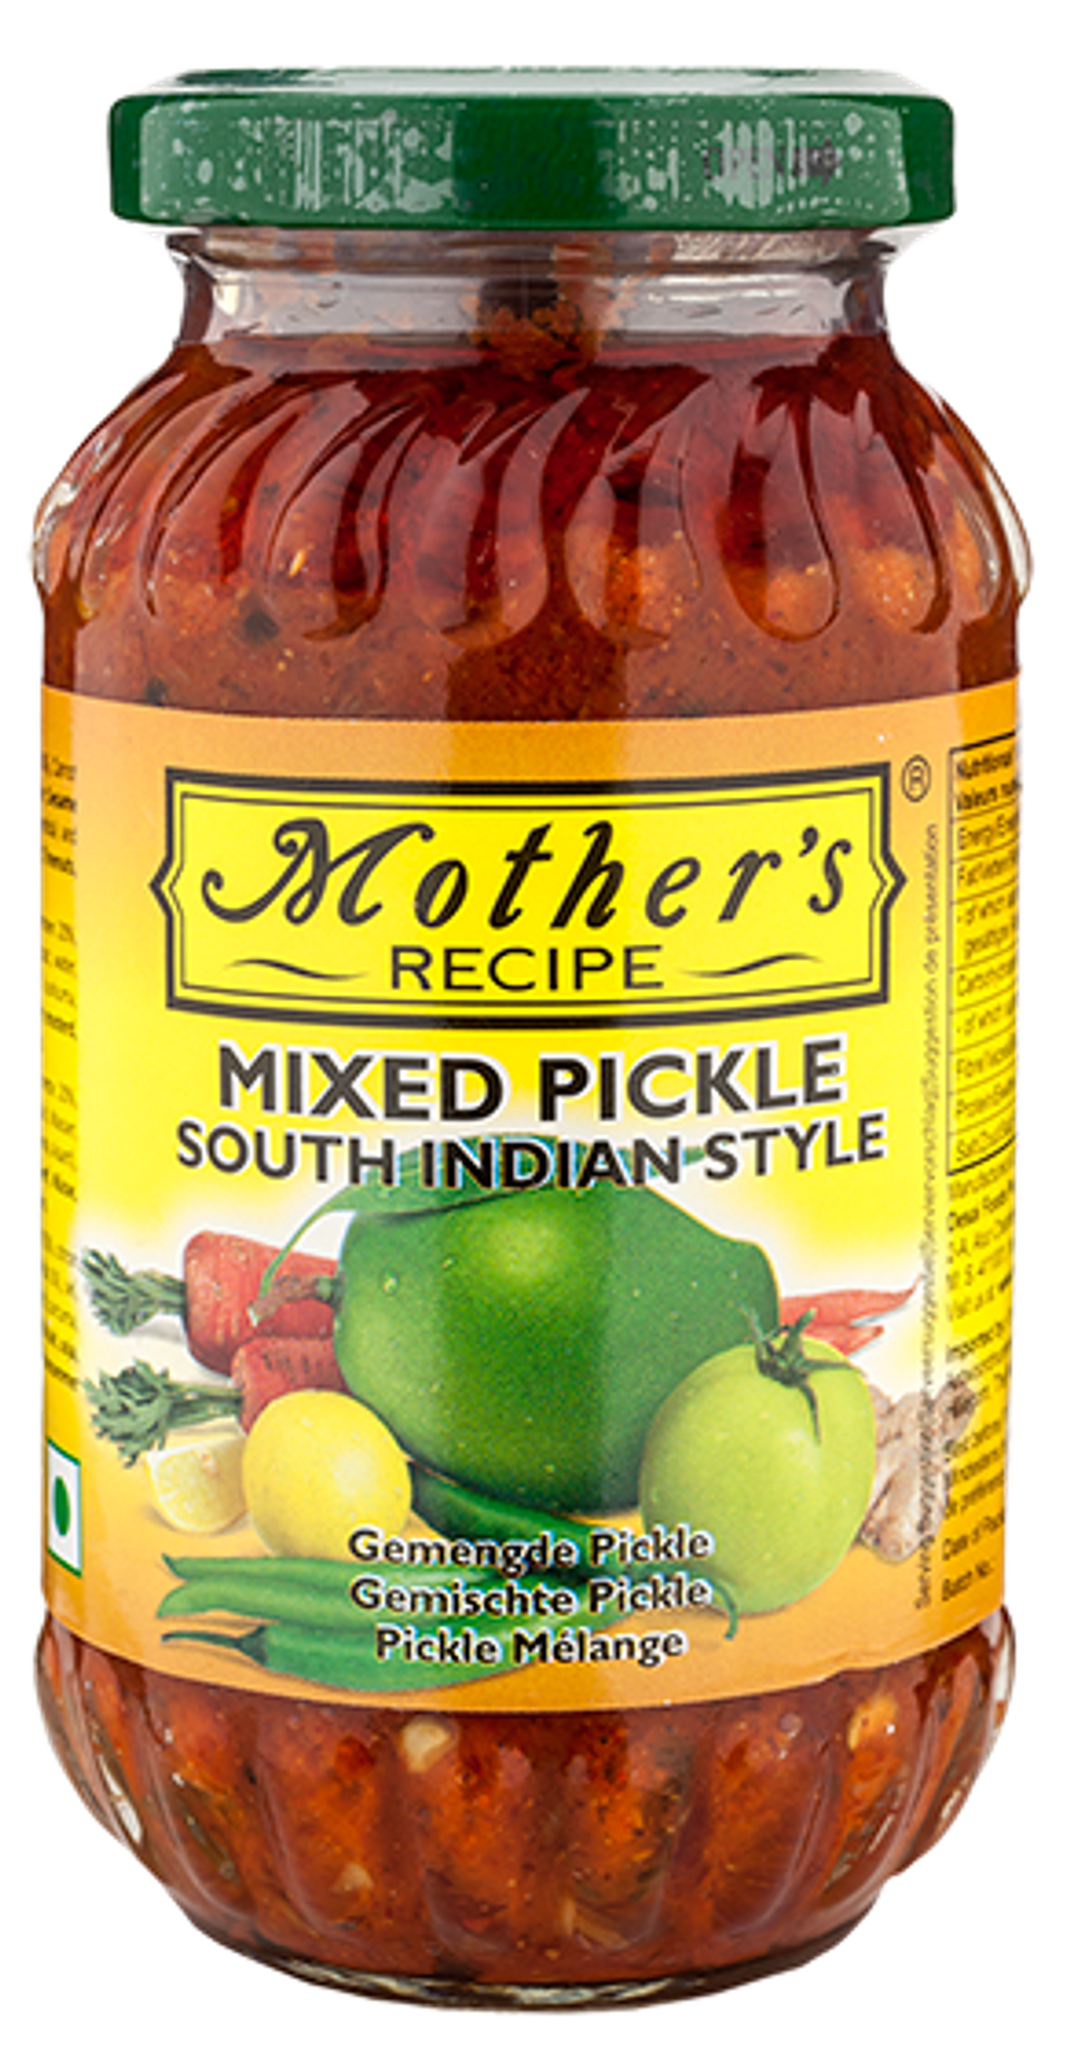 Mixed Pickle (South Indian Style)